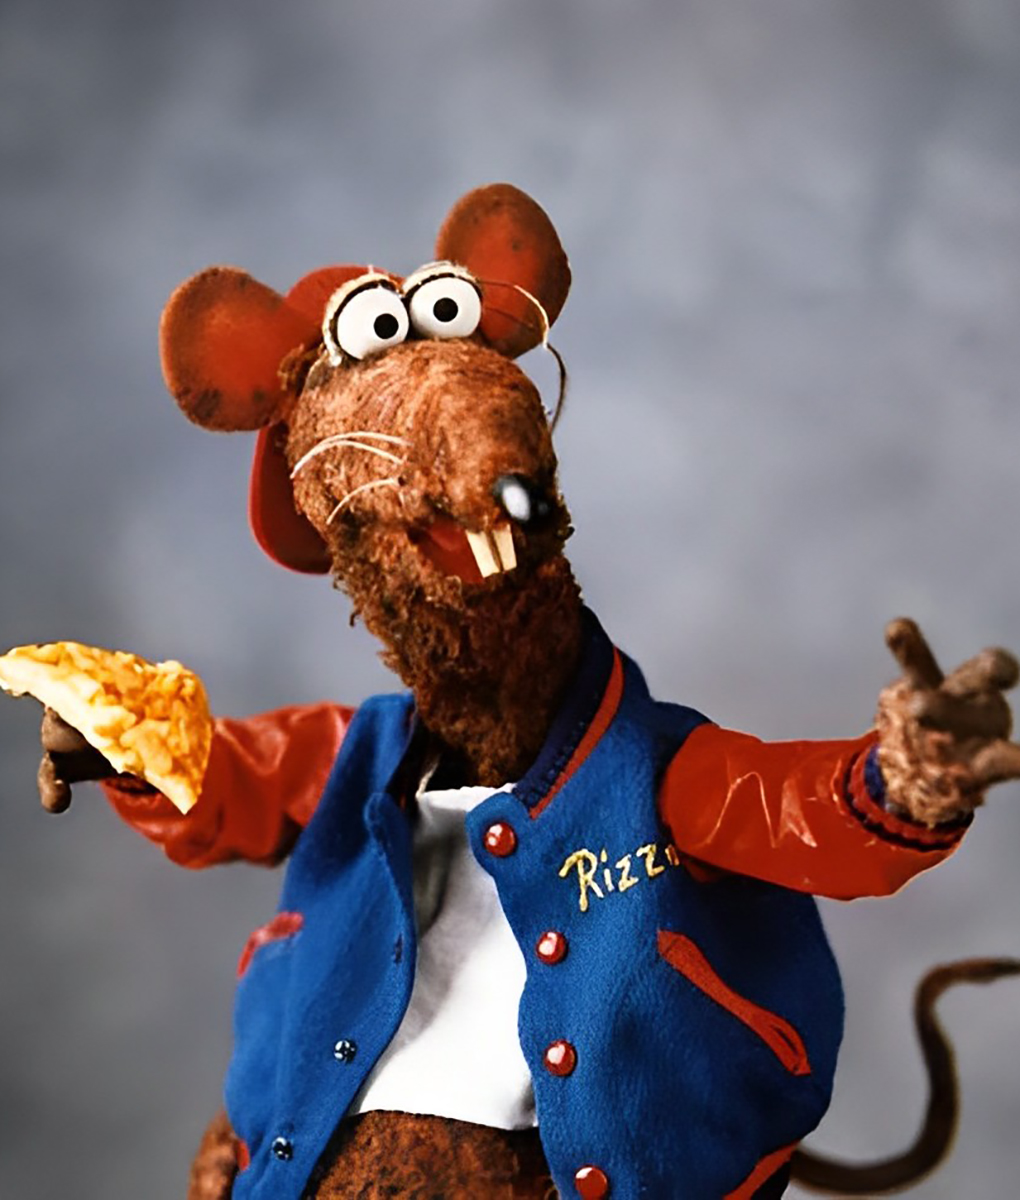 The Muppet Rizzo the Rat Varsity Jacket